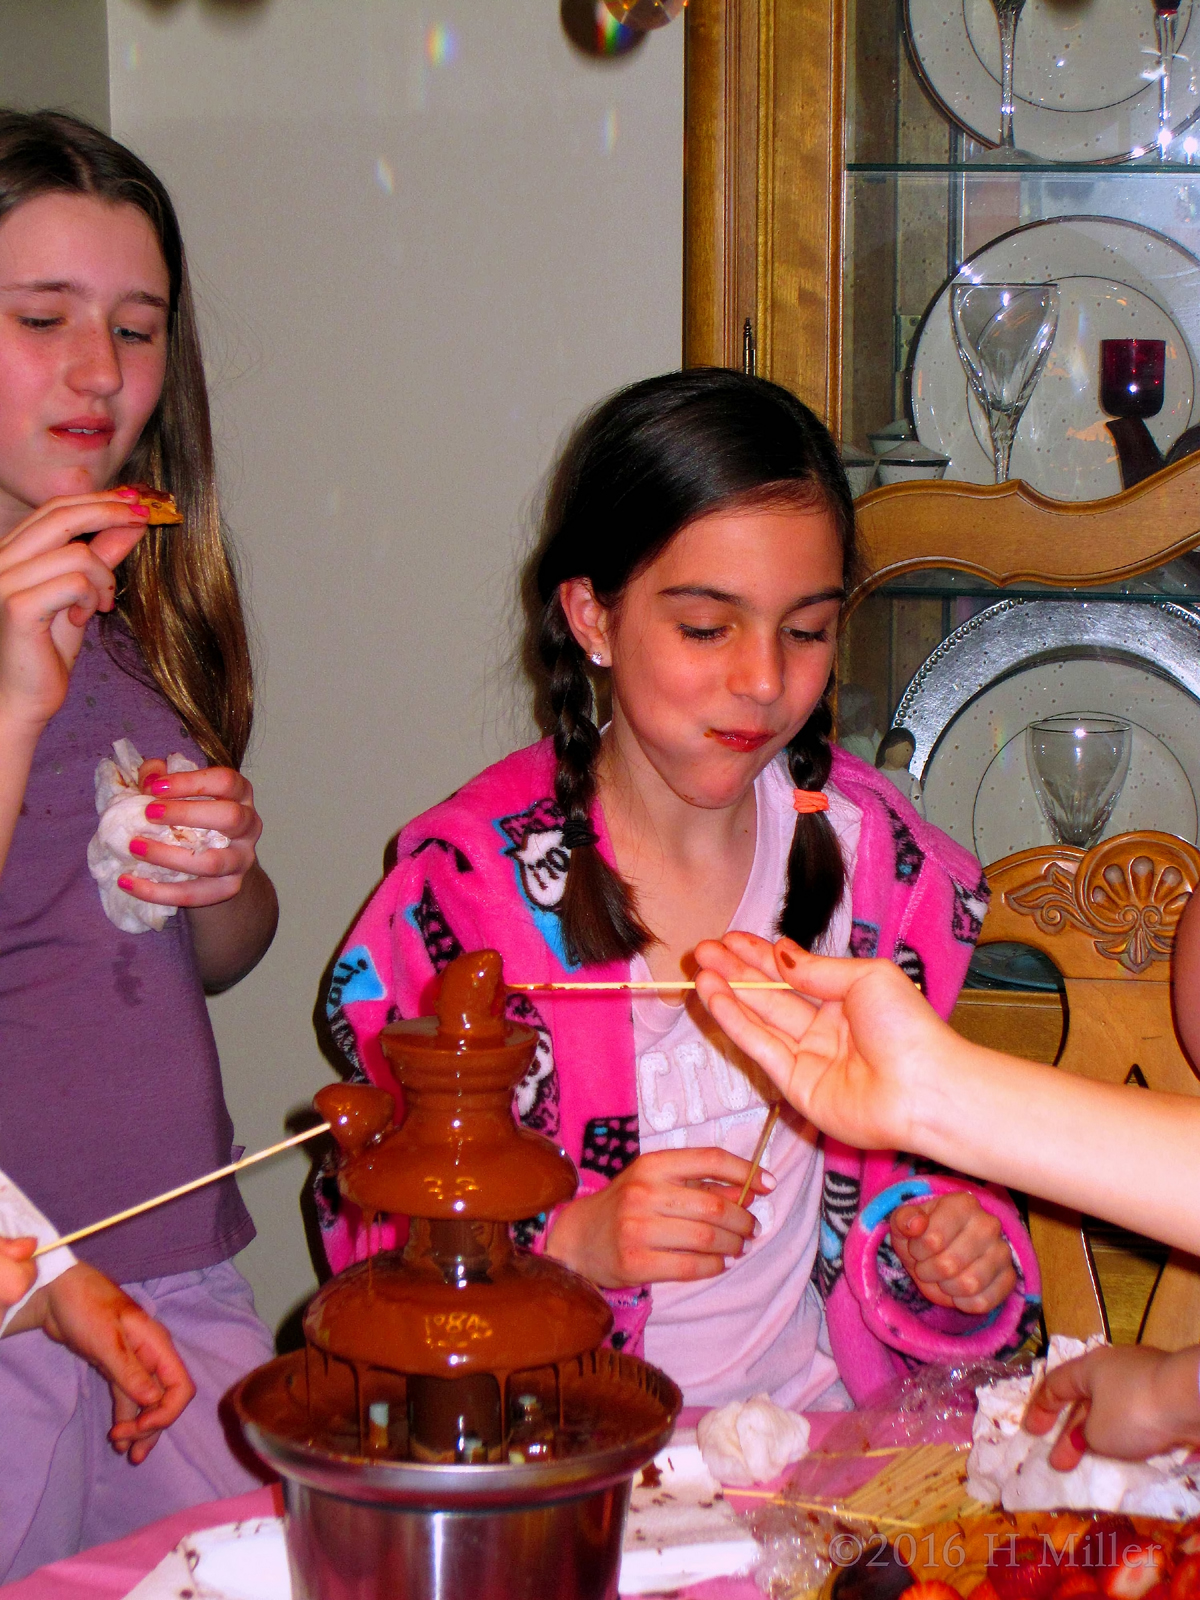 Brooke And Friends Enjoy The Yummy Chocolate Fondue Fountain And Snacks! 